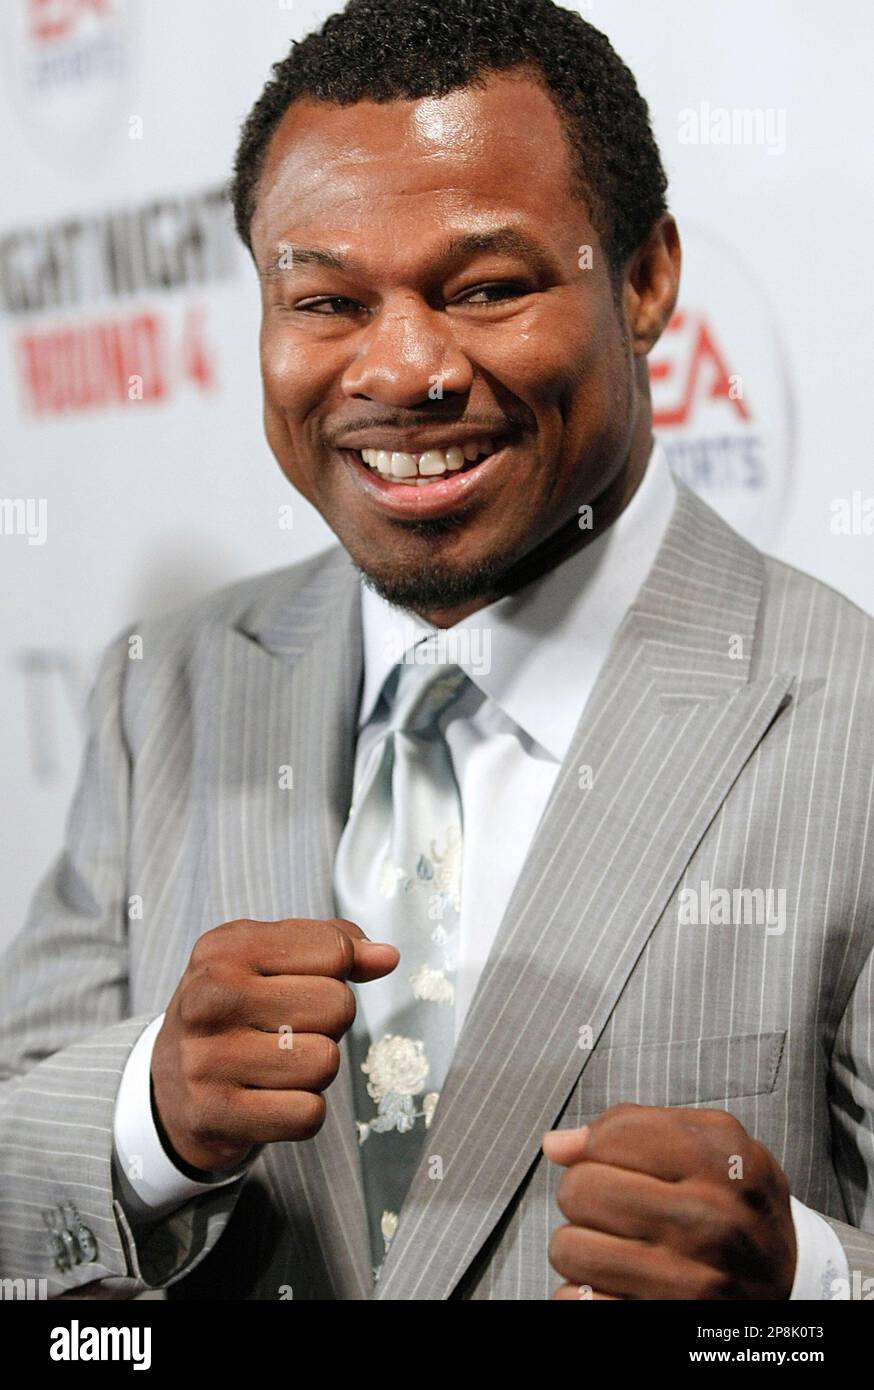 Boxer Sugar Shane Mosley arrives at the premiere of the documentary feature  film "Tyson" in West Hollywood, Calif. on Thursday, April 16, 2009. (AP  Photo/Dan Steinberg Stock Photo - Alamy